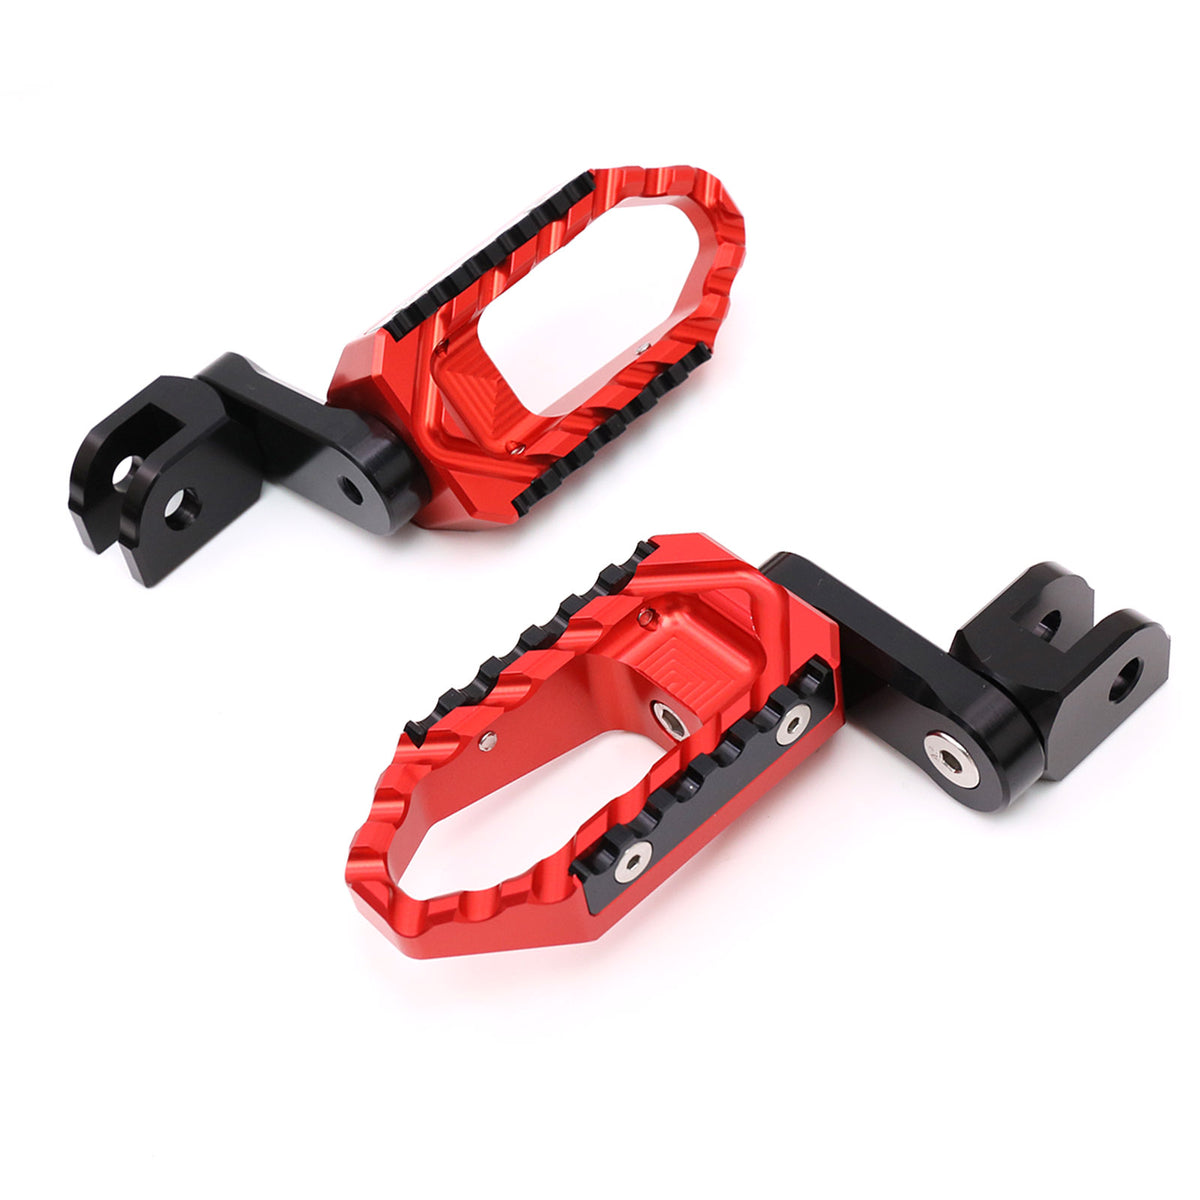 Fit Razor MX350 MX400 MX500 MX650 Touring 40mm 1.5 inch Adjustable Extended Extension Lowering Lower Front Foot Pegs Footpegs Electric Dirt Bike MC Motoparts